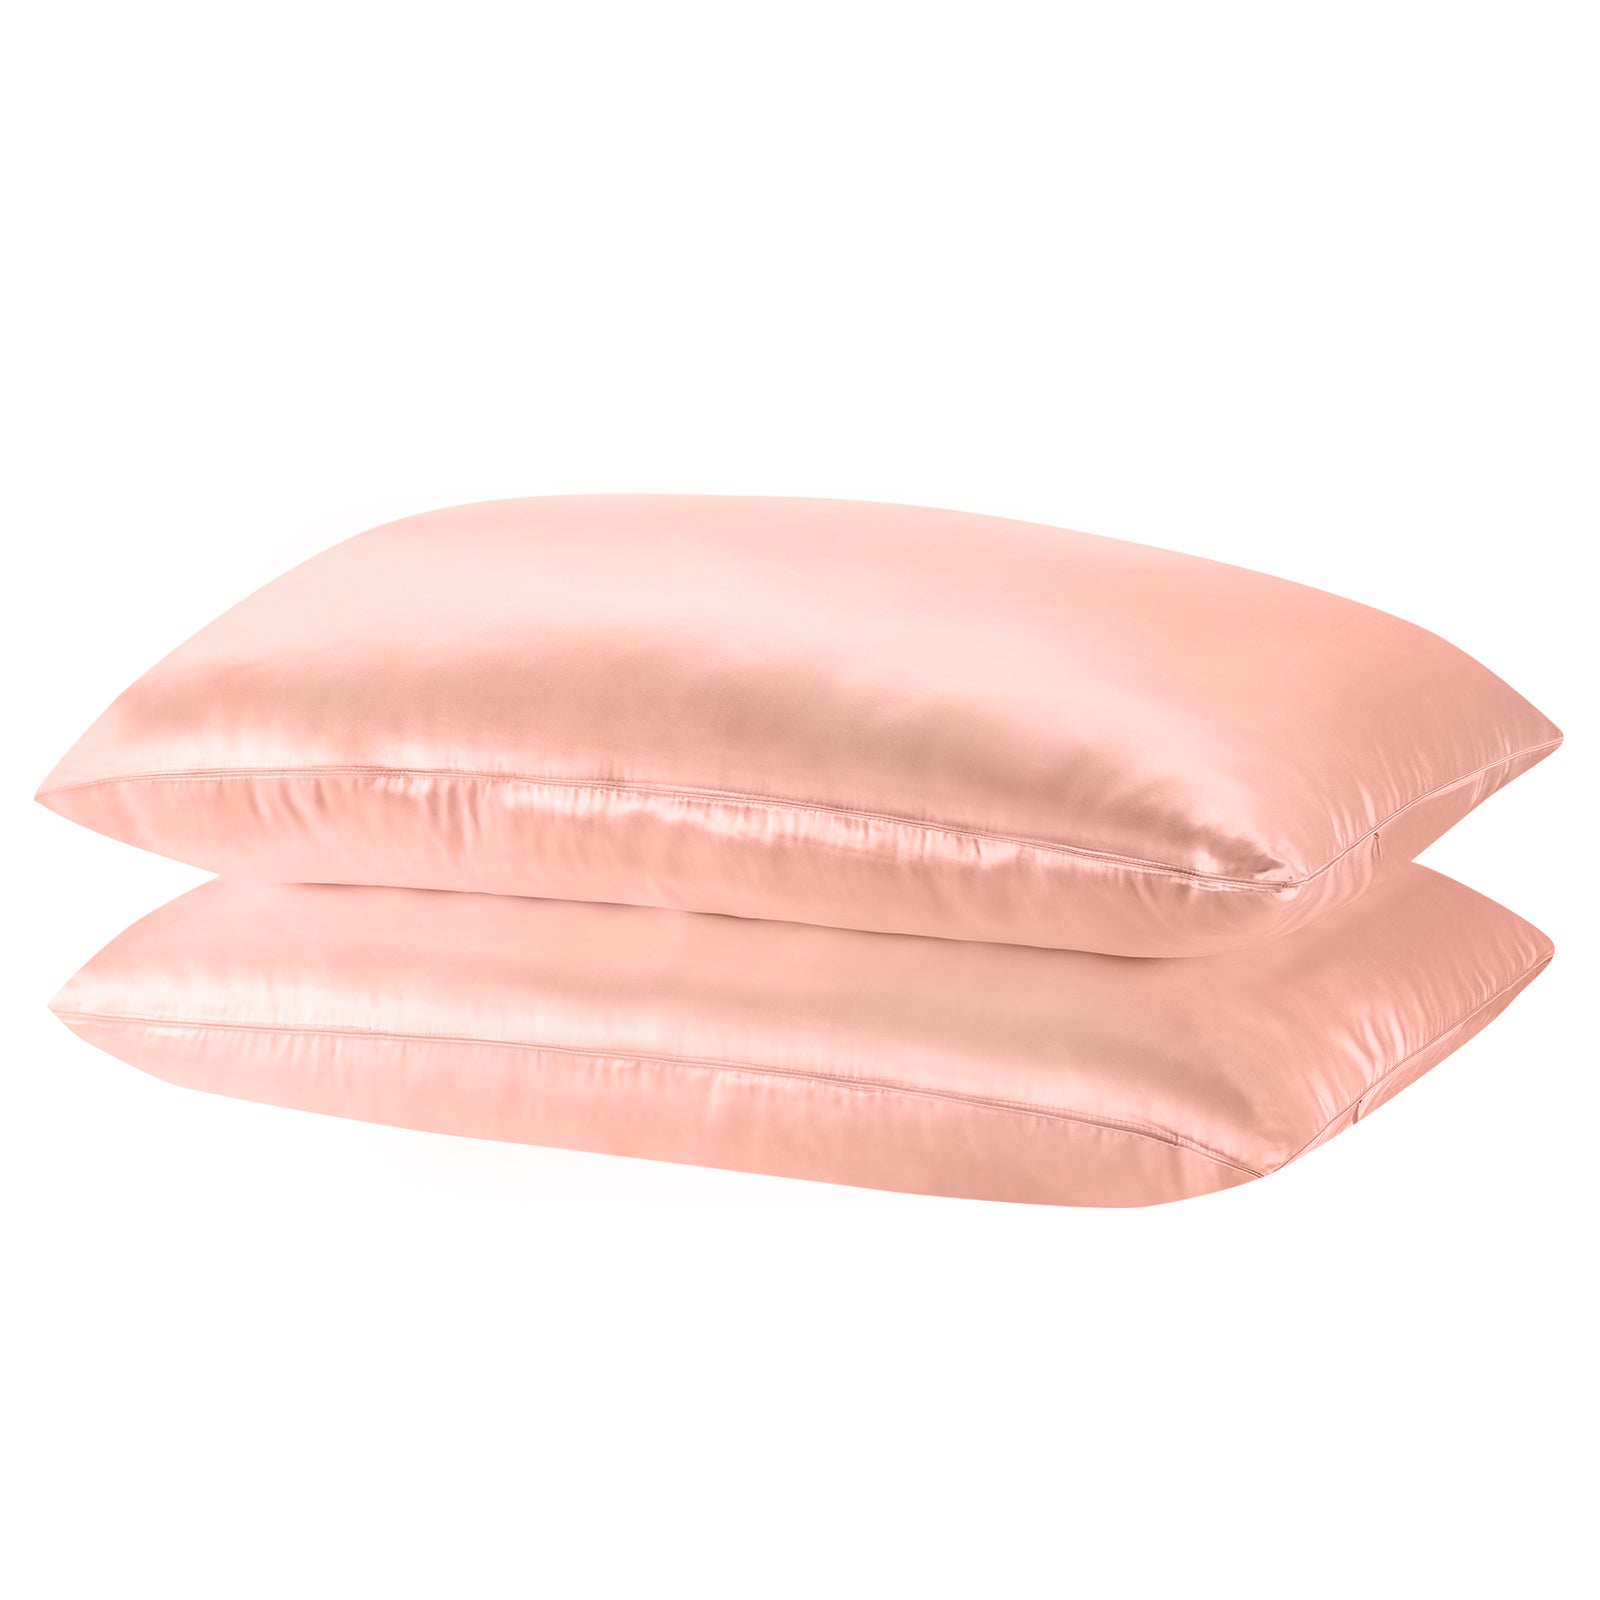 Mulberry Silk Pillow Case Twin Pack - Size: 51X76Cm - Blush